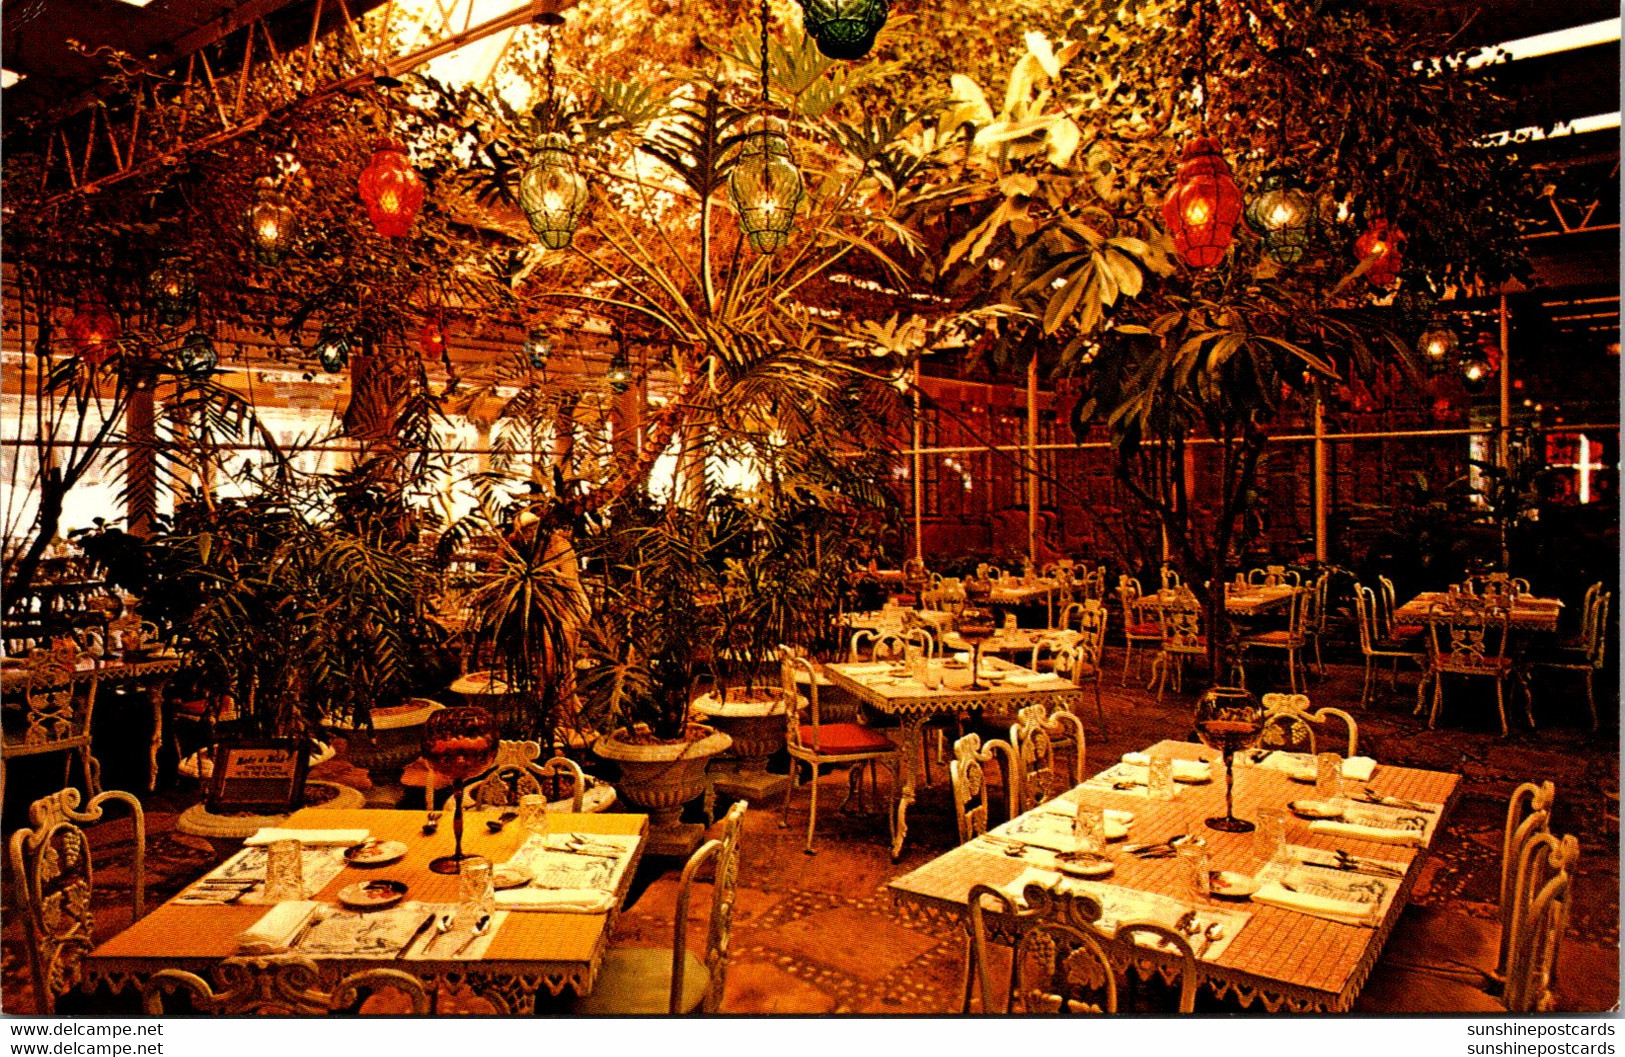 Florida Clearwater Kapok Tree Inn Patio Dining Amid Tropical Indoor Garden - Clearwater